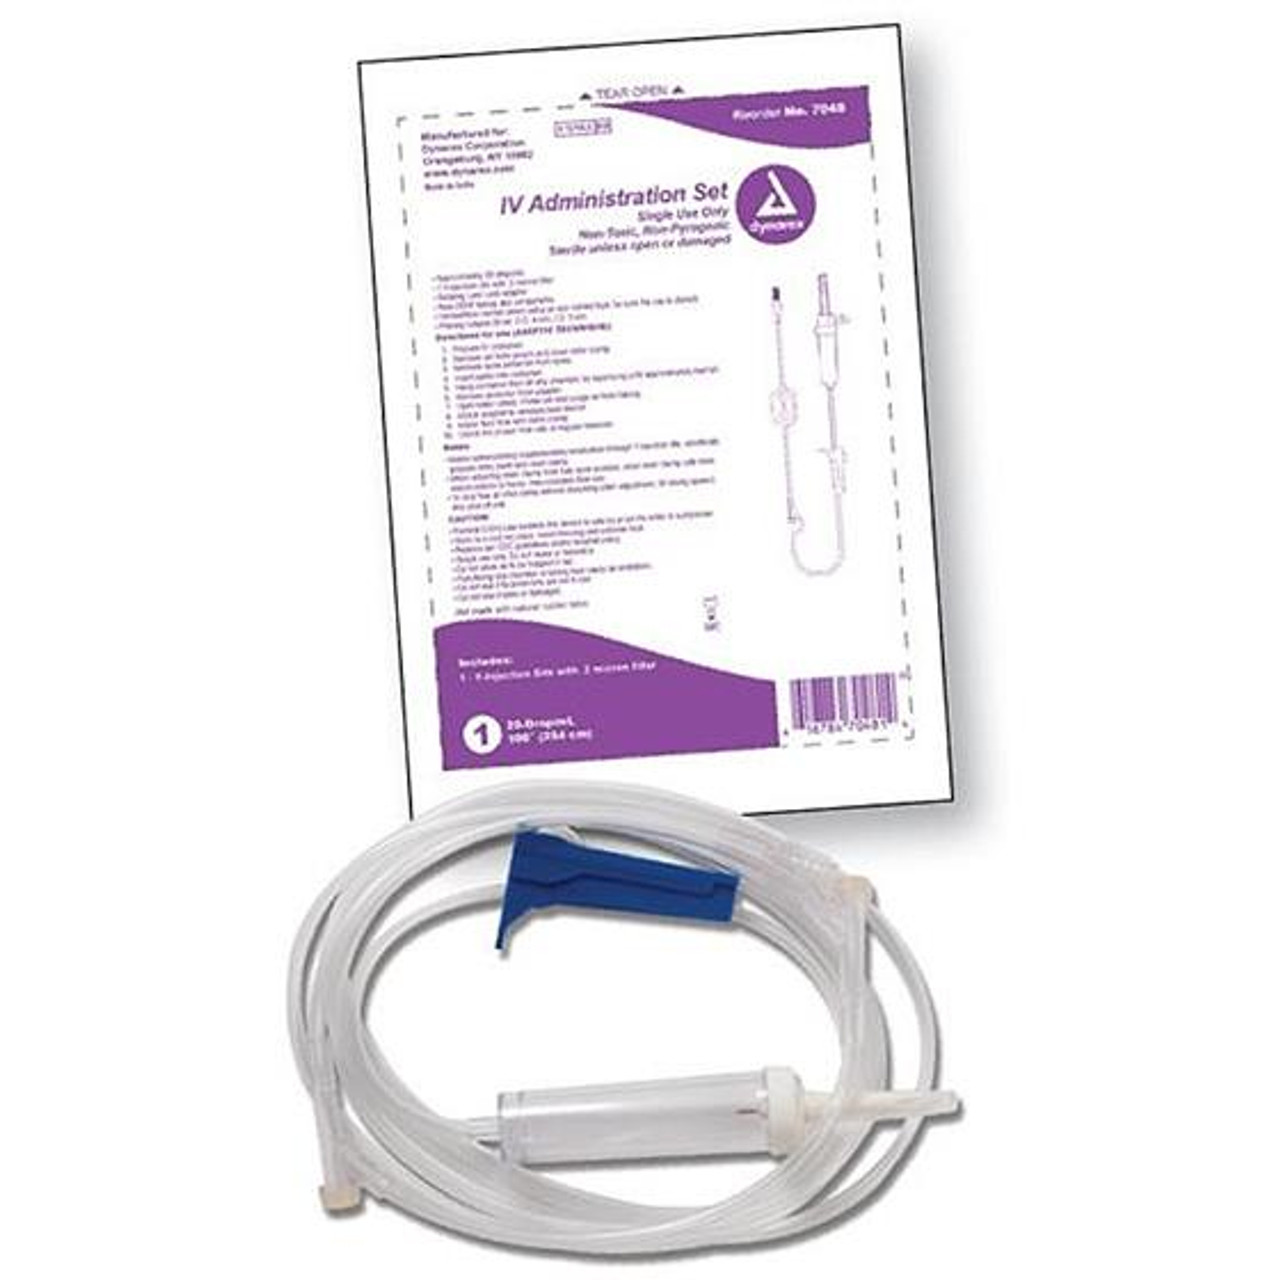 Needleless IV Drip Sets with Luer and Pierceable Ports - Medical Warehouse